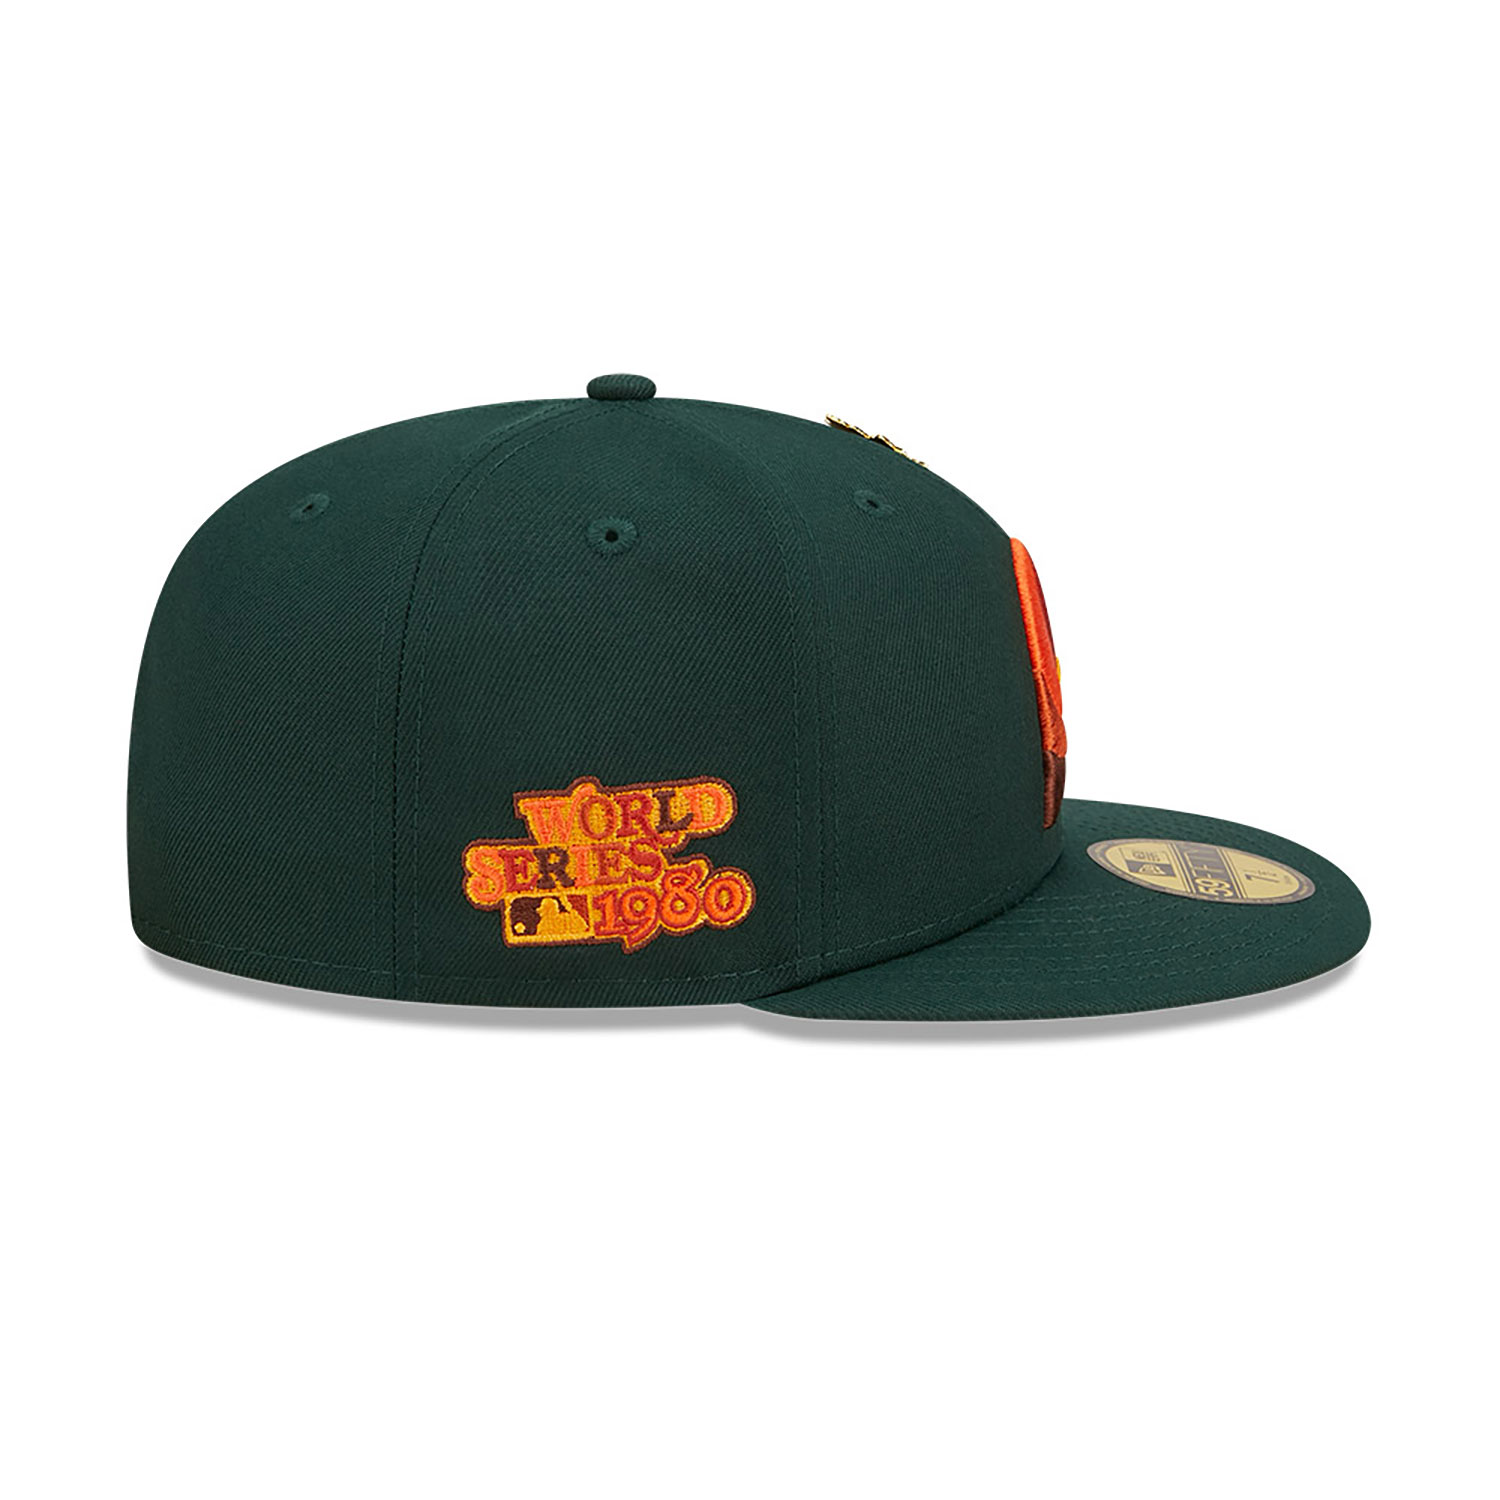 Philadelphia Phillies Leafy Dark Green 59FIFTY Fitted Cap